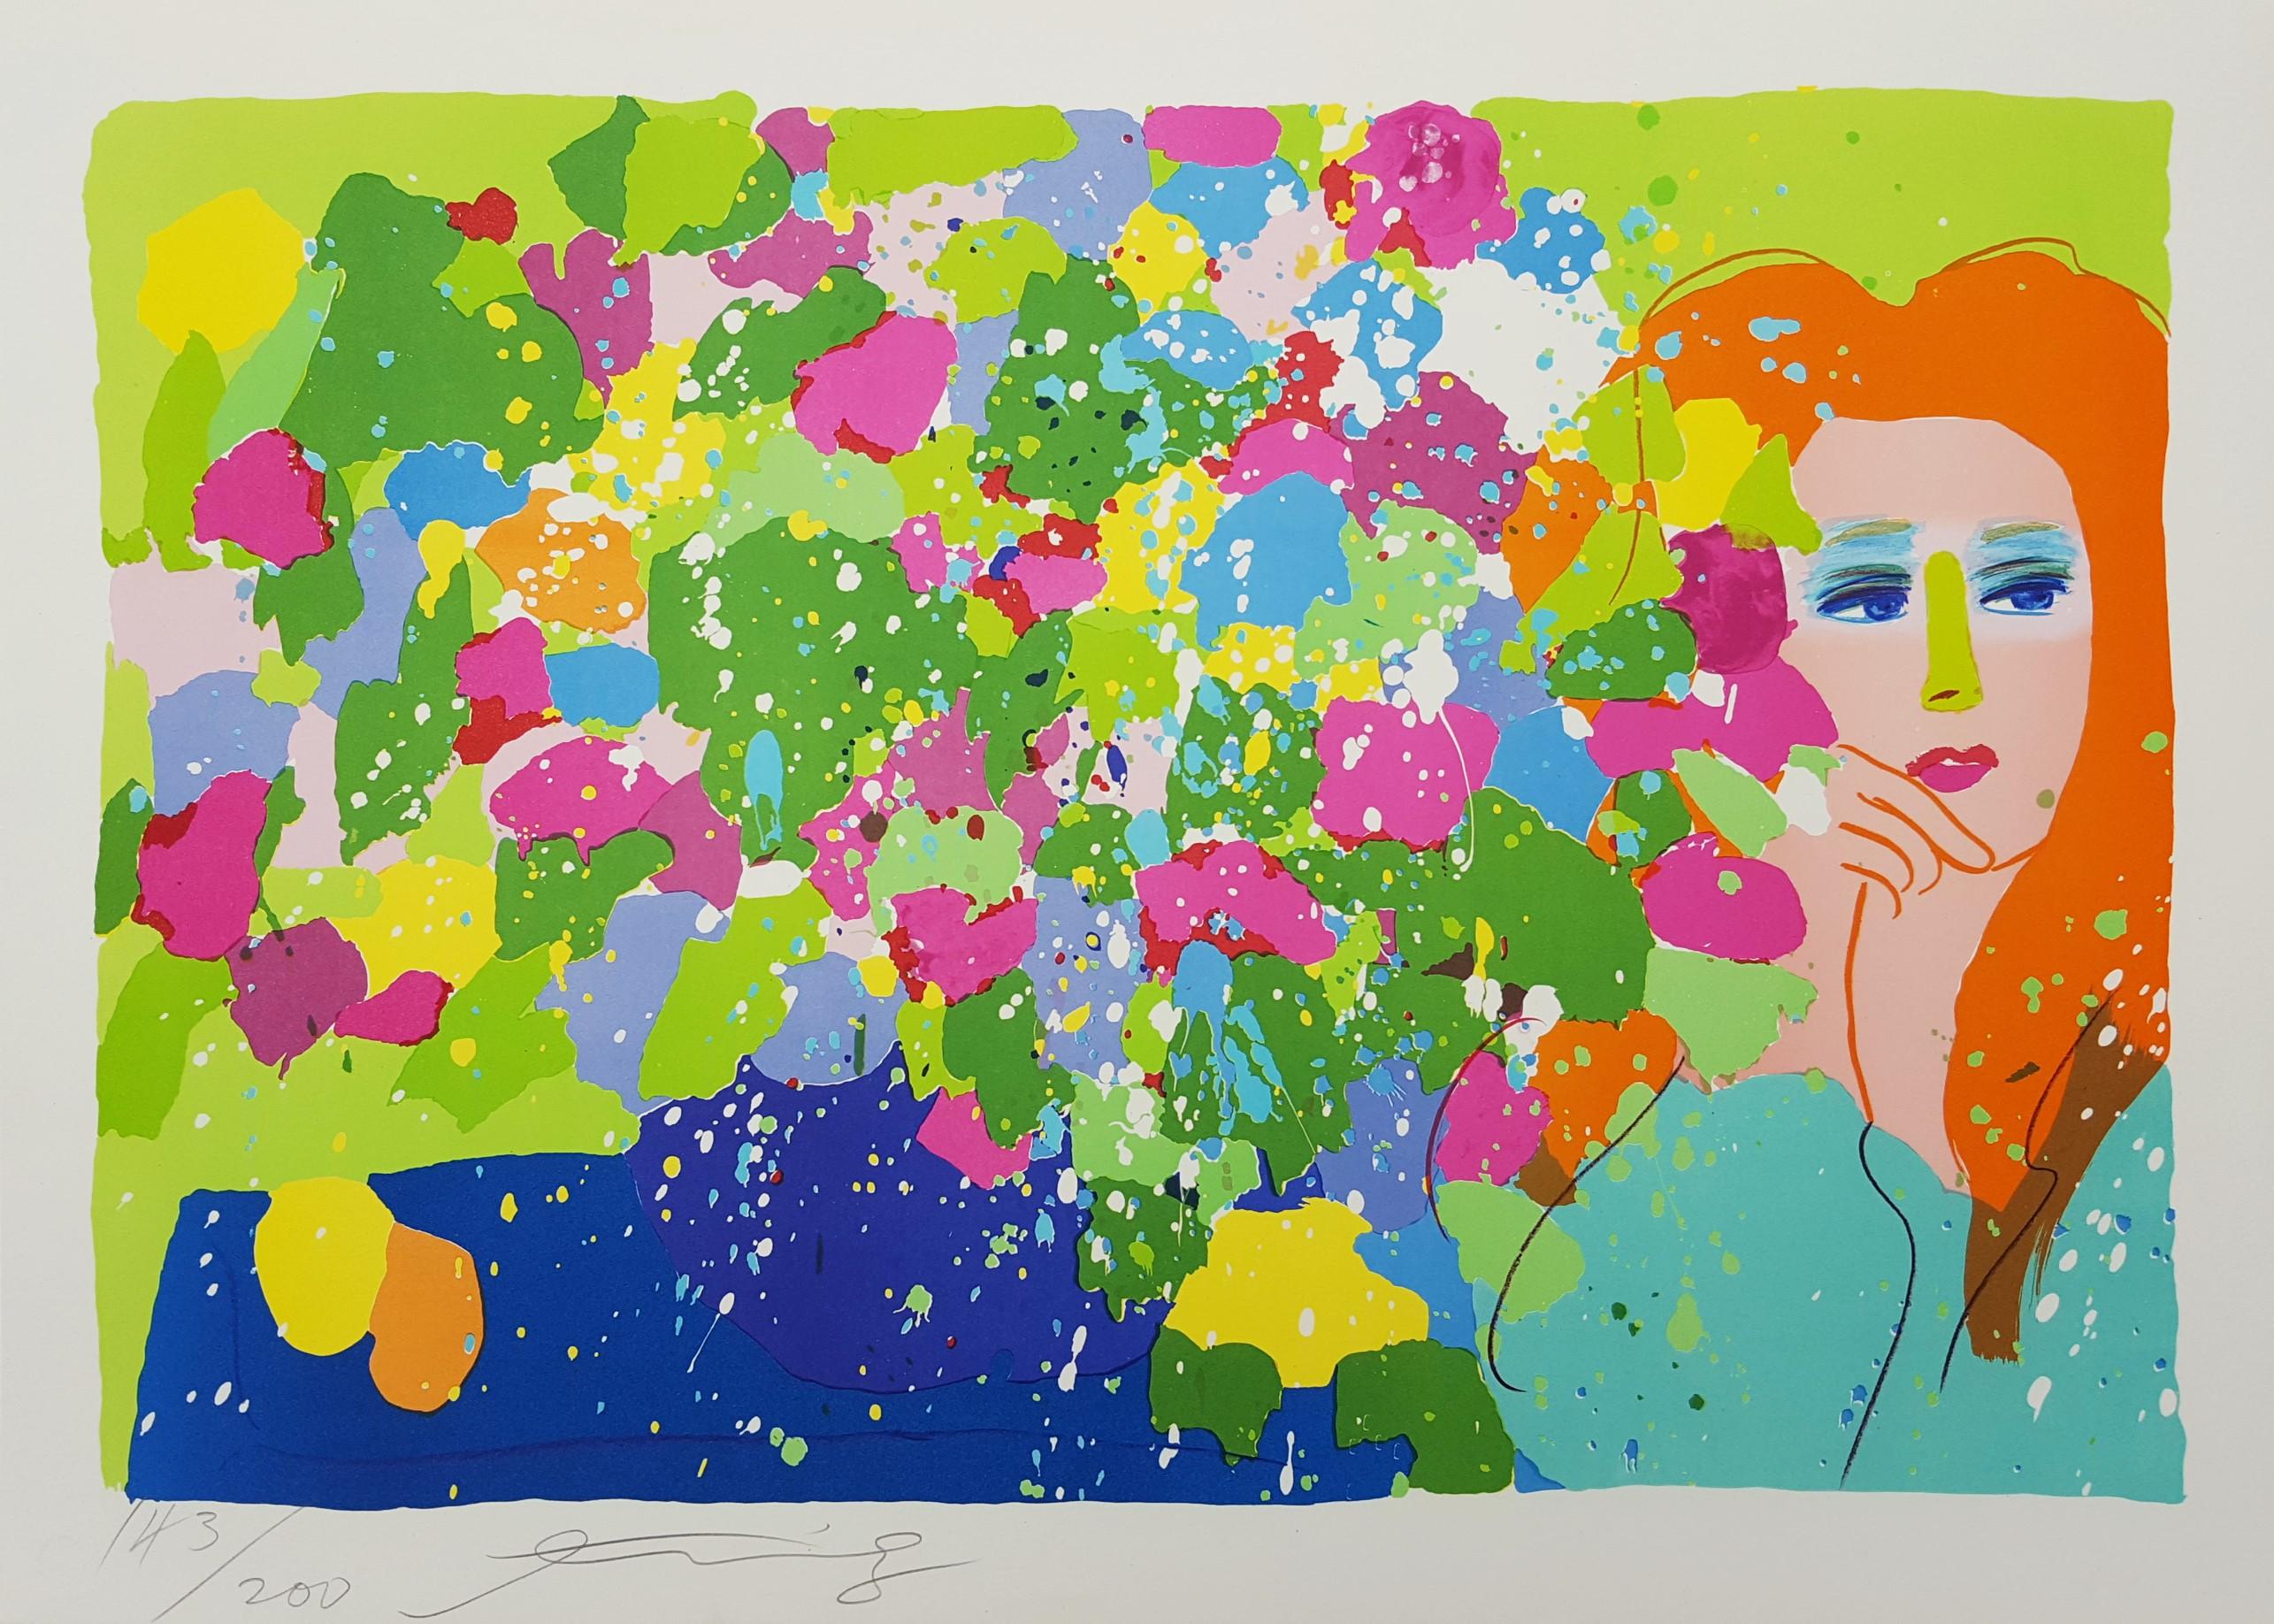 Lady with Flowers /// Pop Art Walasse Ting Buntes Mädchen Abstrakte Lithographie Kunst im Angebot 1